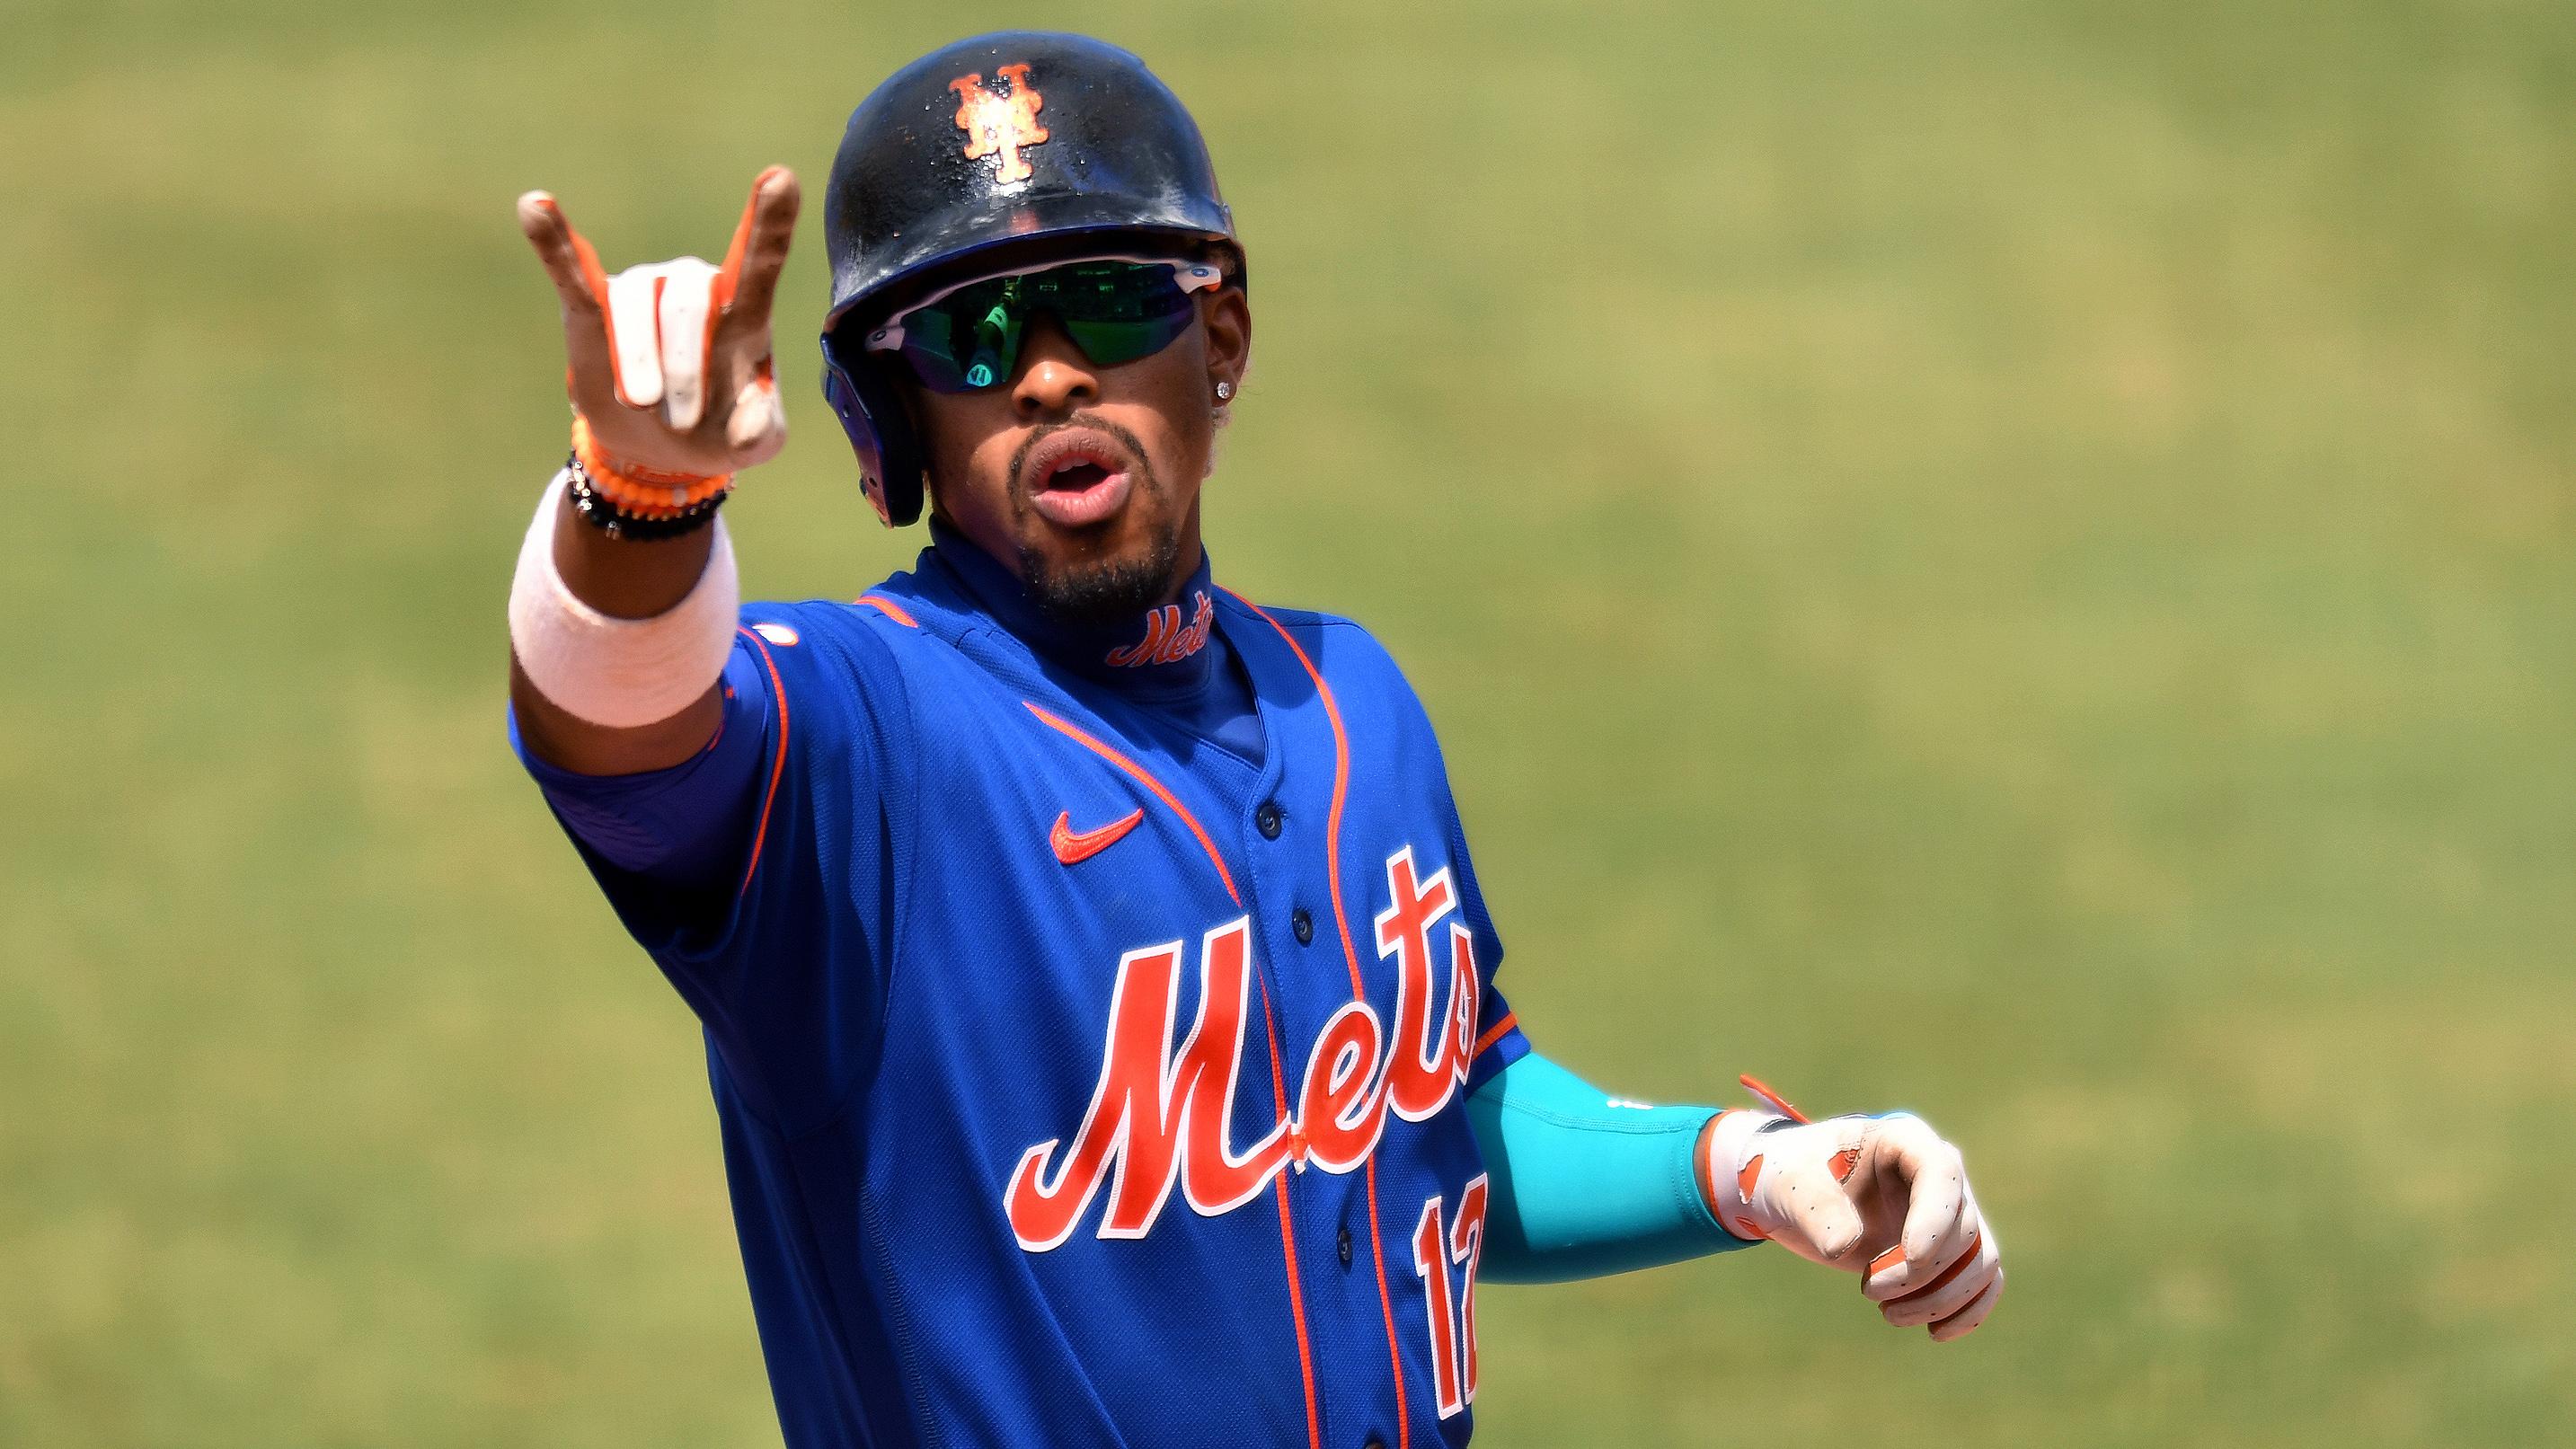 Mar 23, 2021; Port St. Lucie, Florida, USA; New York Mets shortstop Francisco Lindor (12) gestures after hitting a home run in the fifth inning against the Miami Marlins during a spring training game at Clover Park. / Jim Rassol-USA TODAY Sports